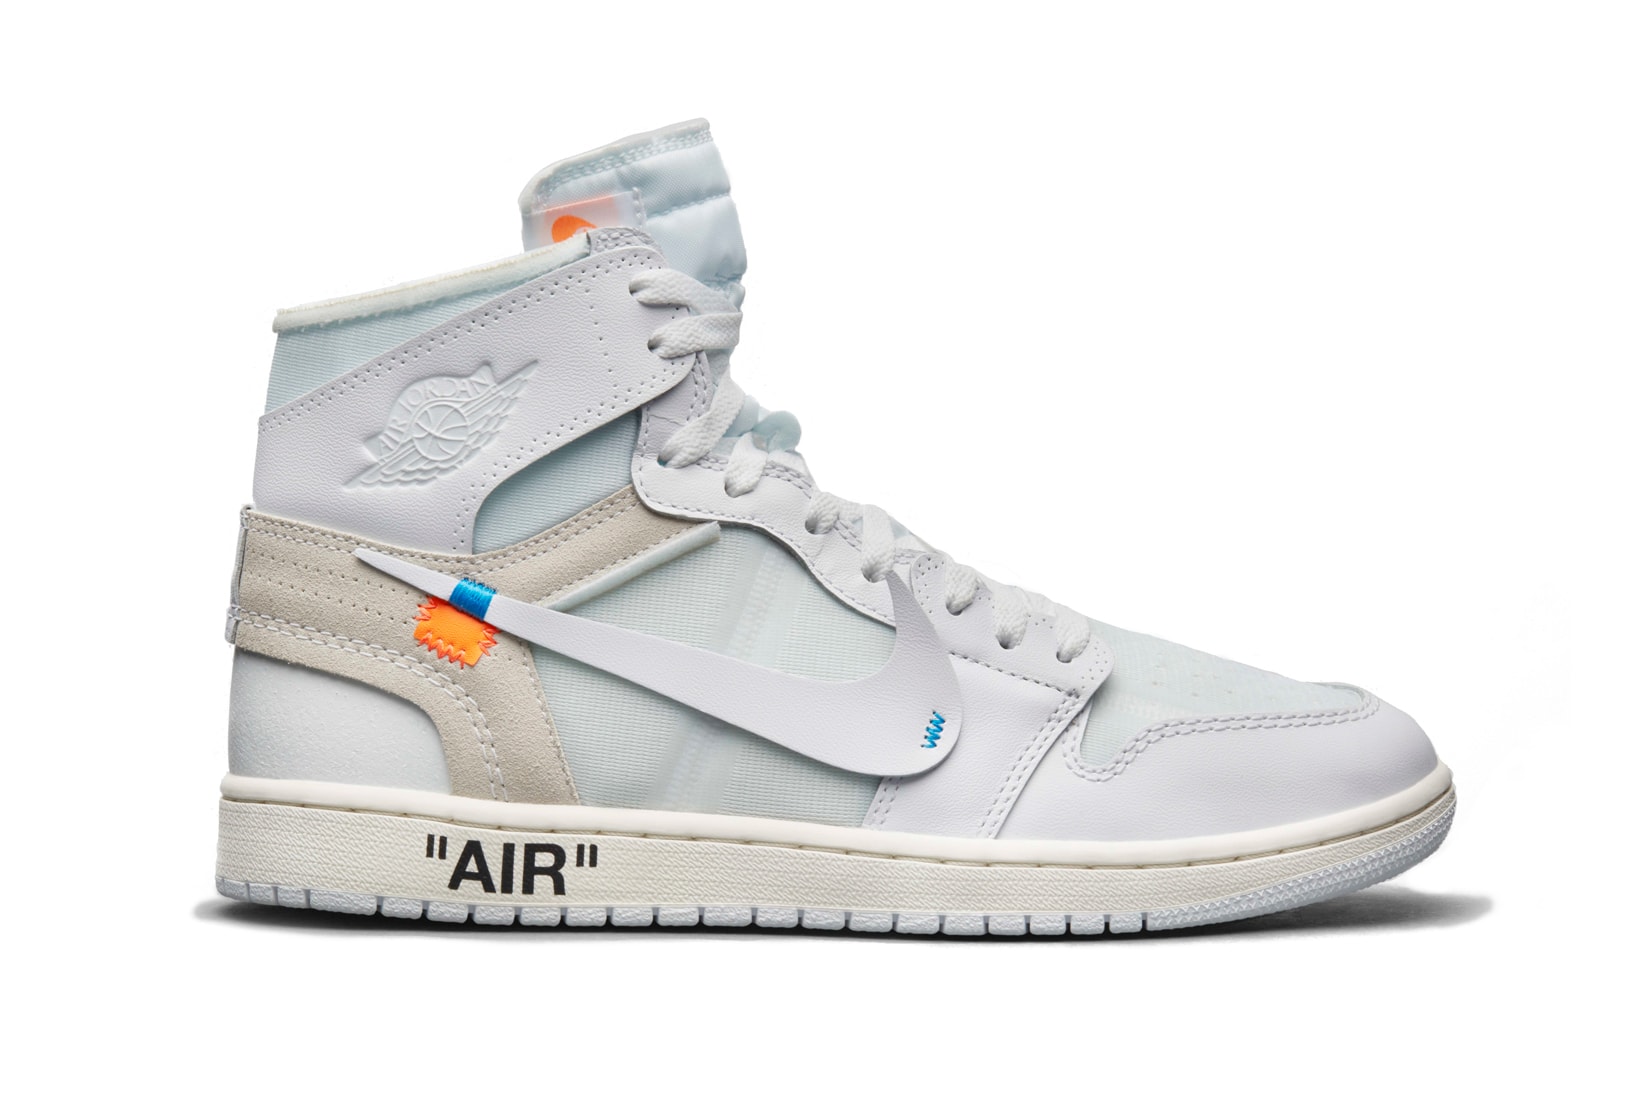 Virgil Abloh Nike Air Jordan 1 "White" Release date drop europe exclusive launch info release the ten snkrs 2018 february 27